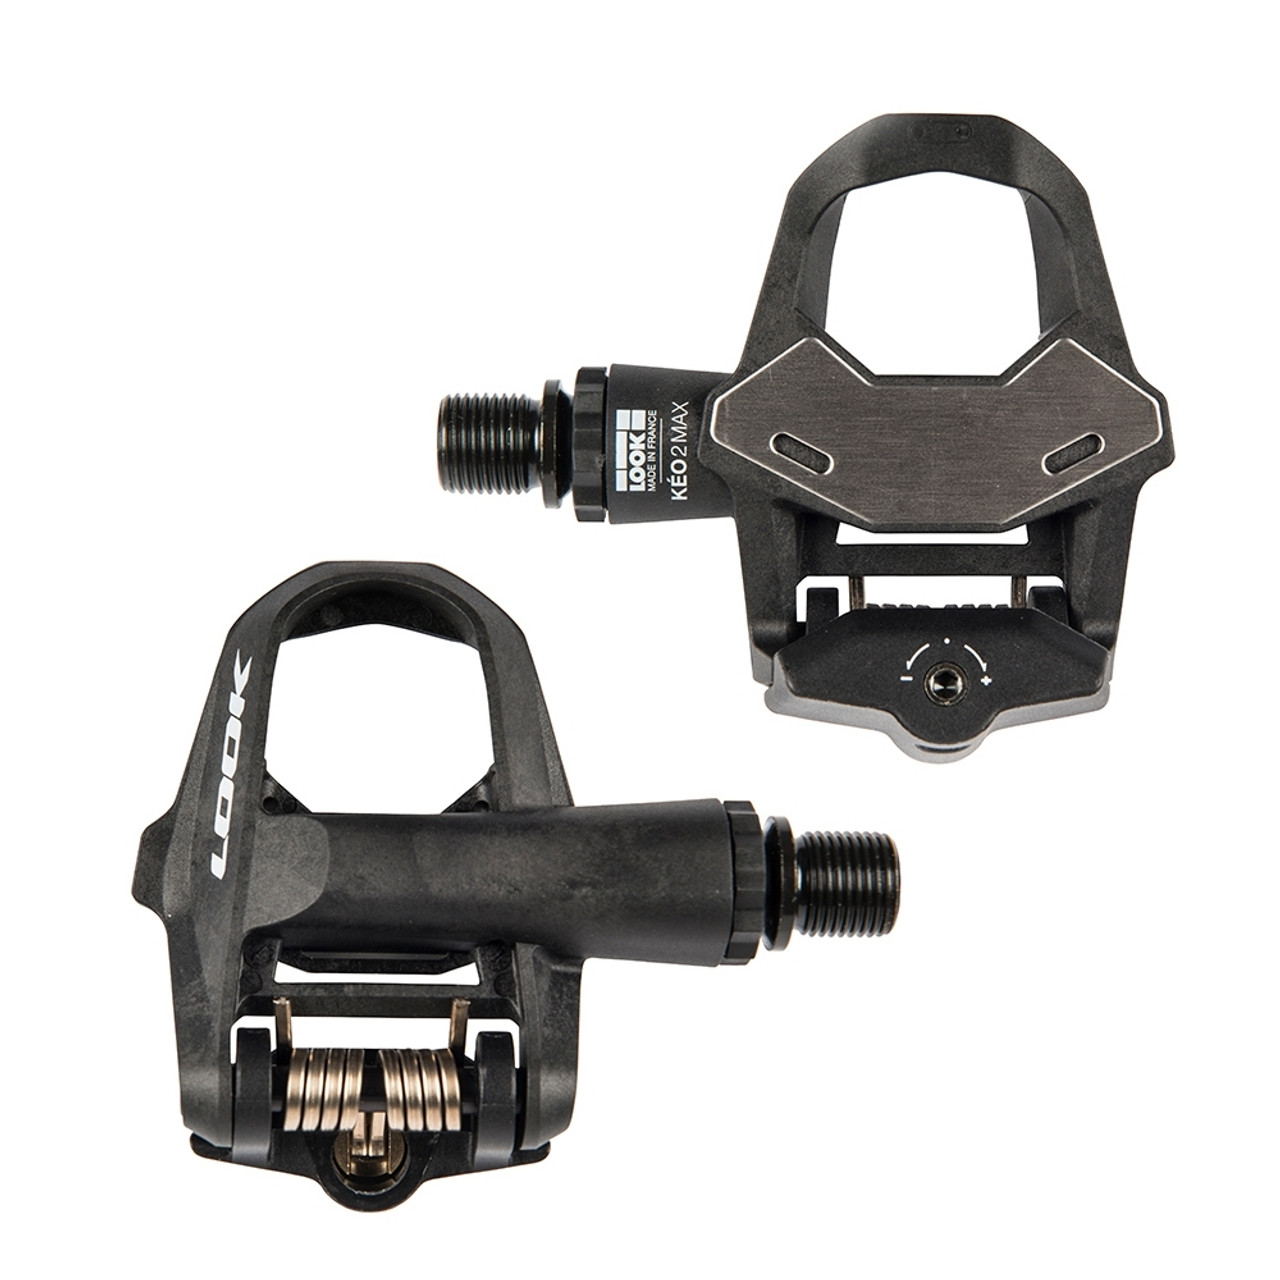 Look Keo 2 Max Pedals Including Cleats In Black